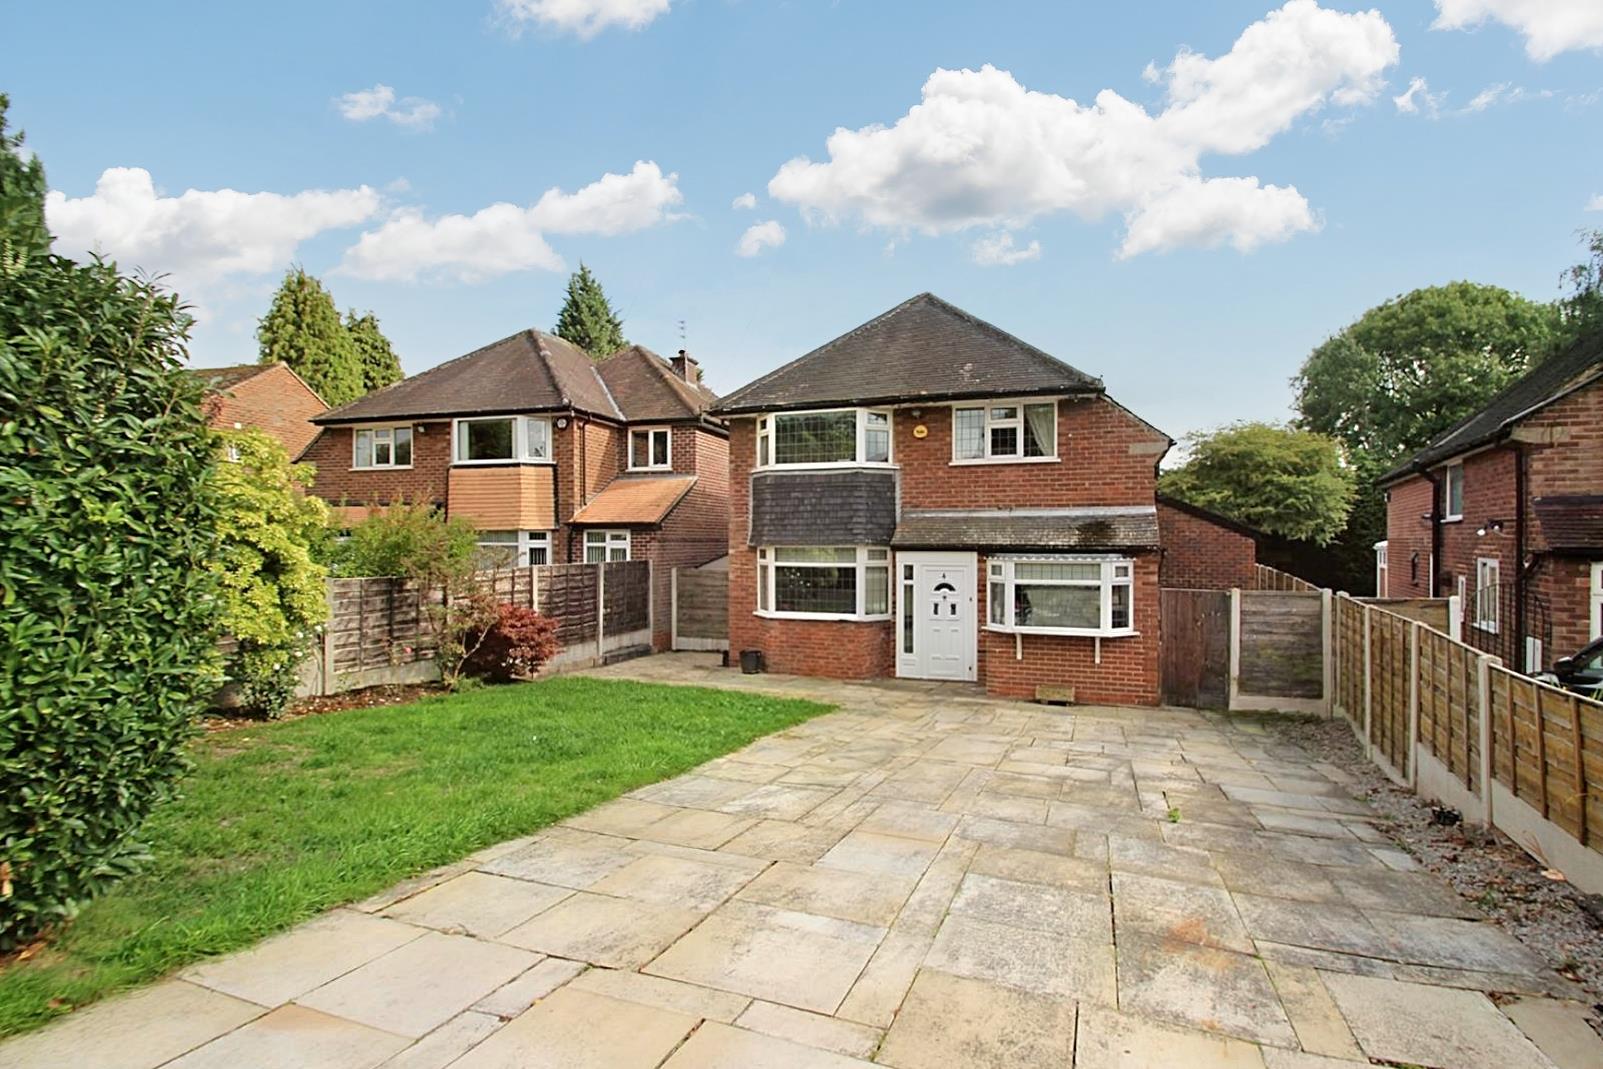 4 bed detached house to rent in Green Gate, Altrincham - Property Image 1